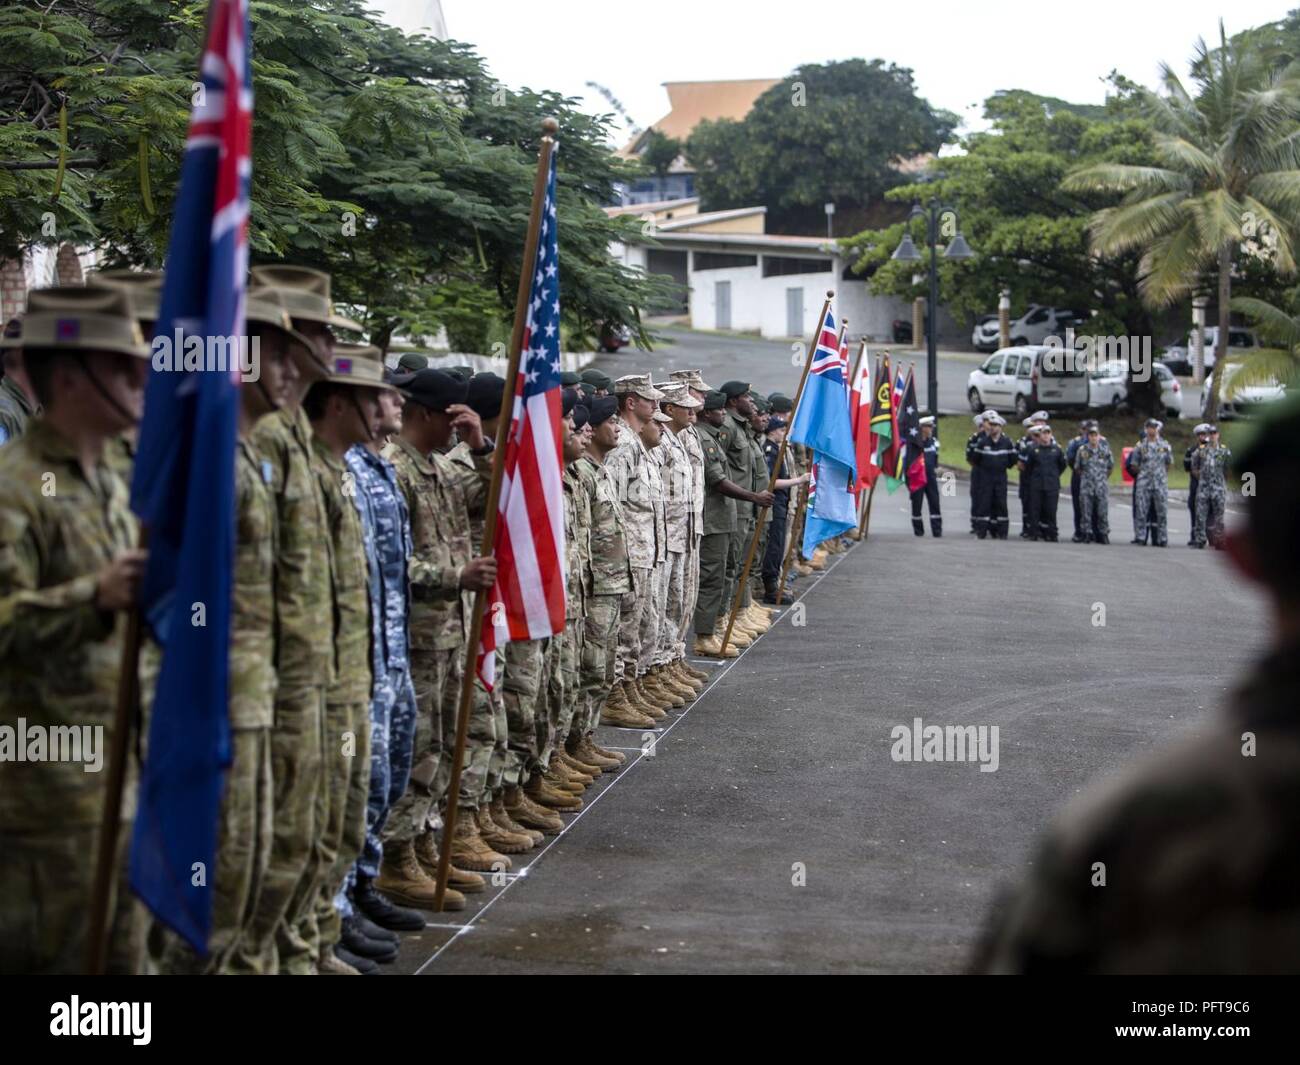 Multiple Nations participate in a closing ceremony for exercise Croix Du Sud at Noumea, New Caledonia, May 25, 2018. The exercise, hosted by the French, is a multi-national humanitarian assistance and disaster relief, a non-combatant evacuation operation and a stability and security operations field training exercise. The Marines are a part of Marine Rotational Force - Darwin, established by former U.S. President Barack Obama and former Australian Prime Minister Julia Gillard in 2011 to build and strengthen partnerships in the Pacific region. Approximately 1,500 Marines are participating in tr Stock Photo